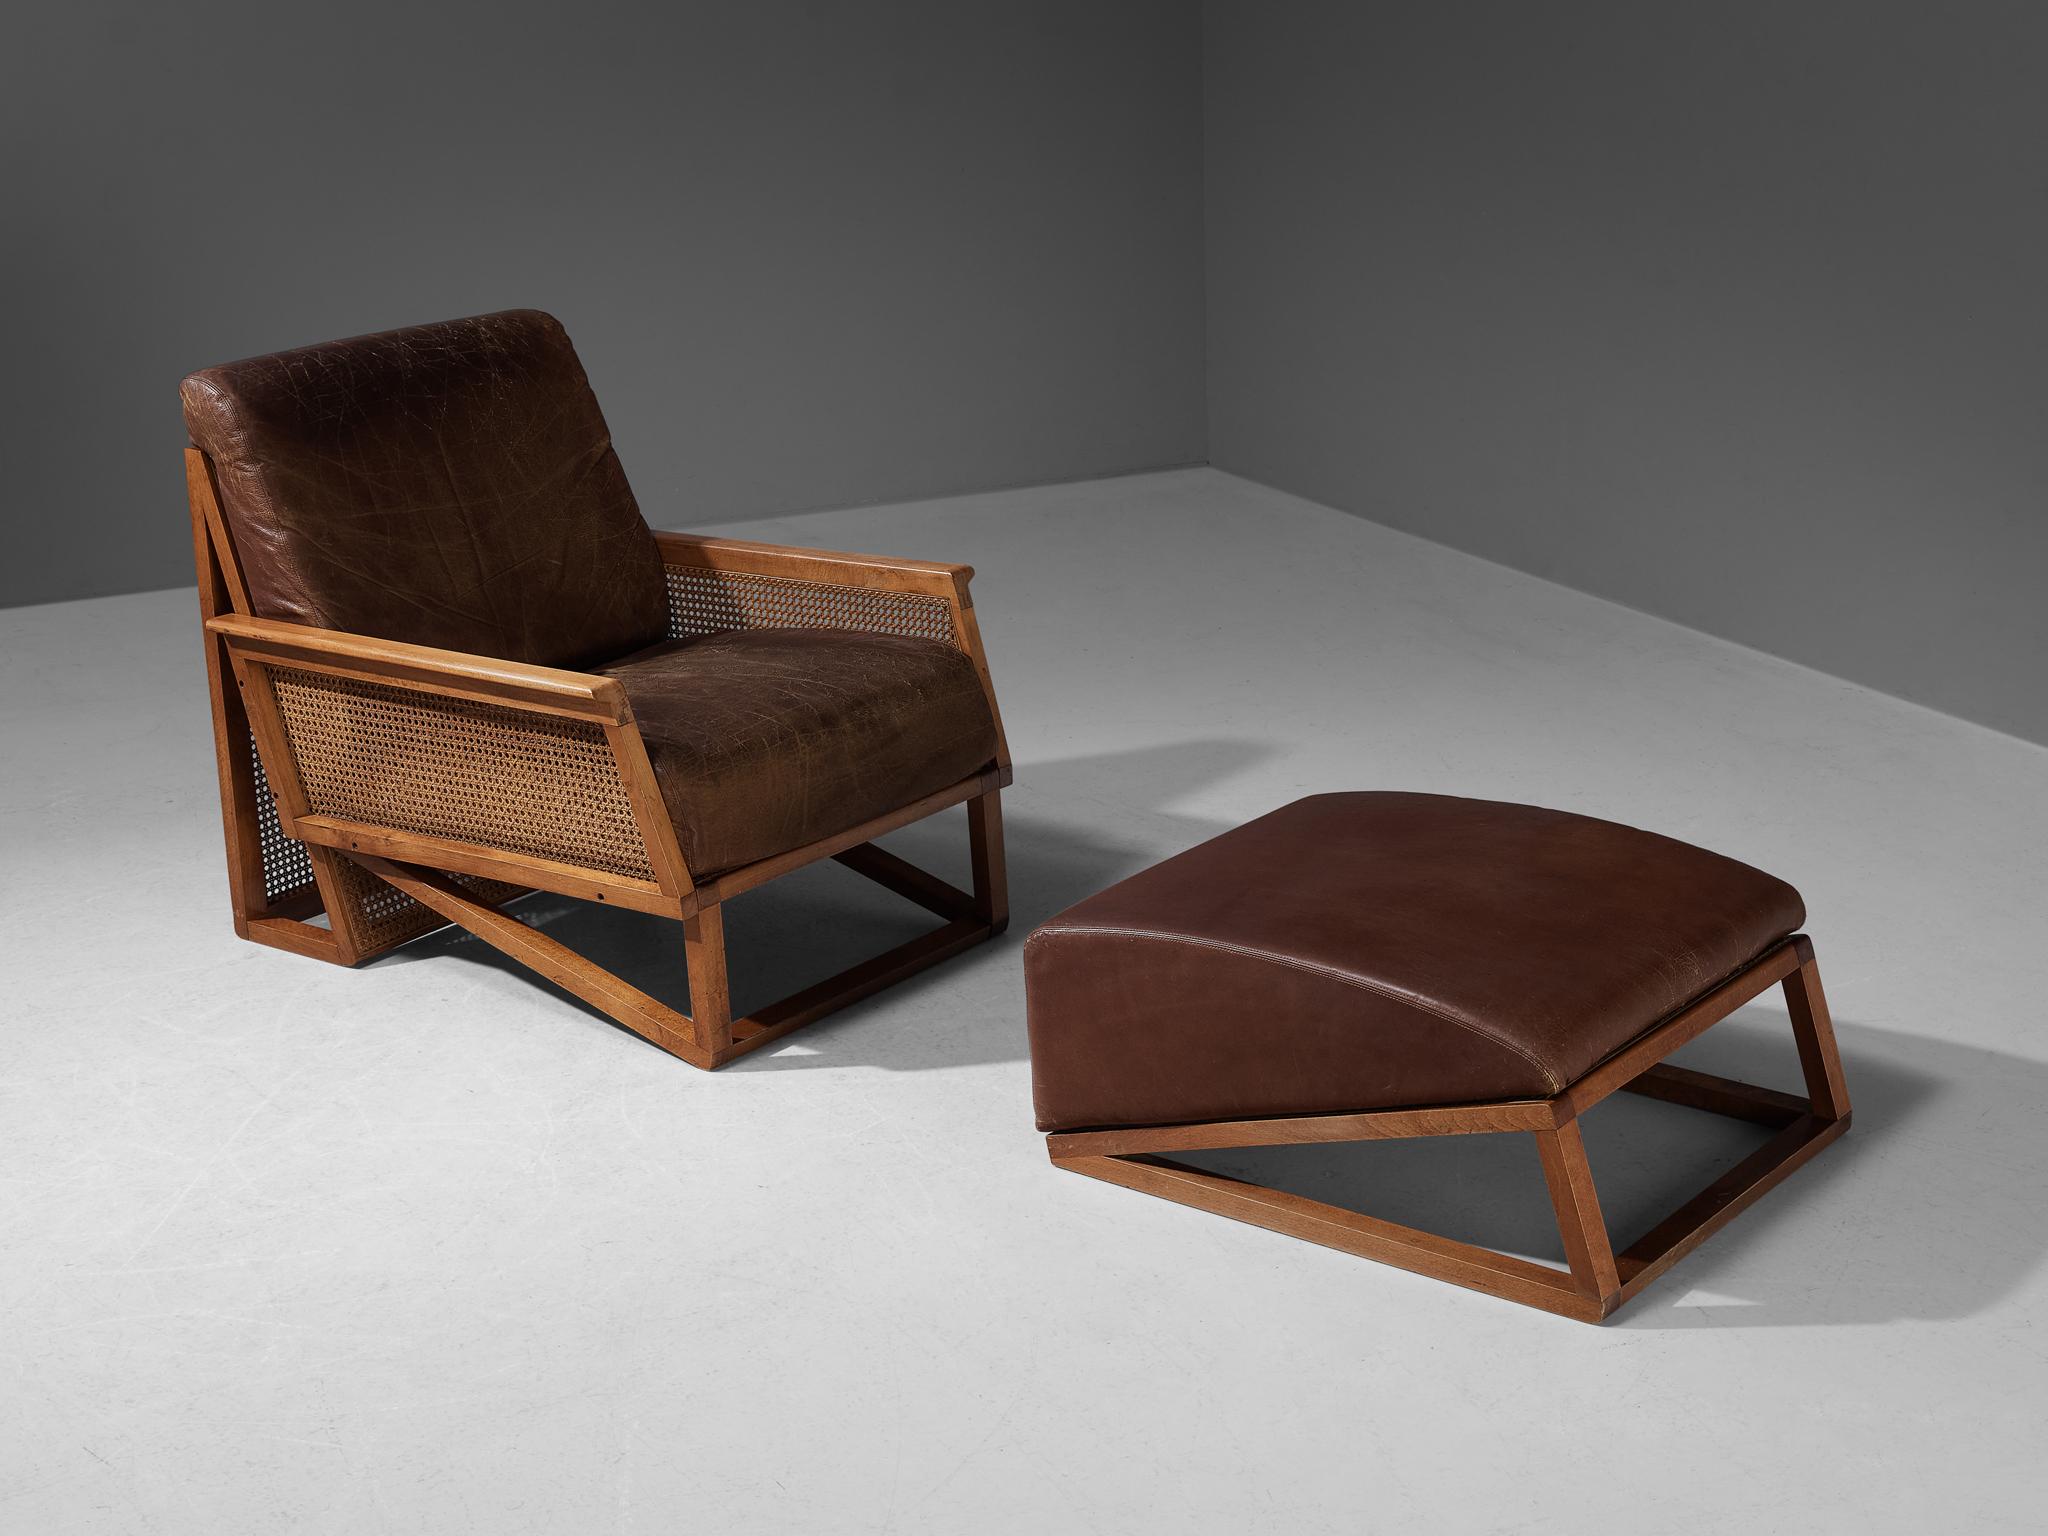 Lounge chair and ottoman, beech, cane webbing, leather, Italy, 1970s

This beautiful lounge chair and ottoman is made in Italy in the 1970s. Made in a geometrical and elegant way, this piece is easy to envision in a library or sun room. The